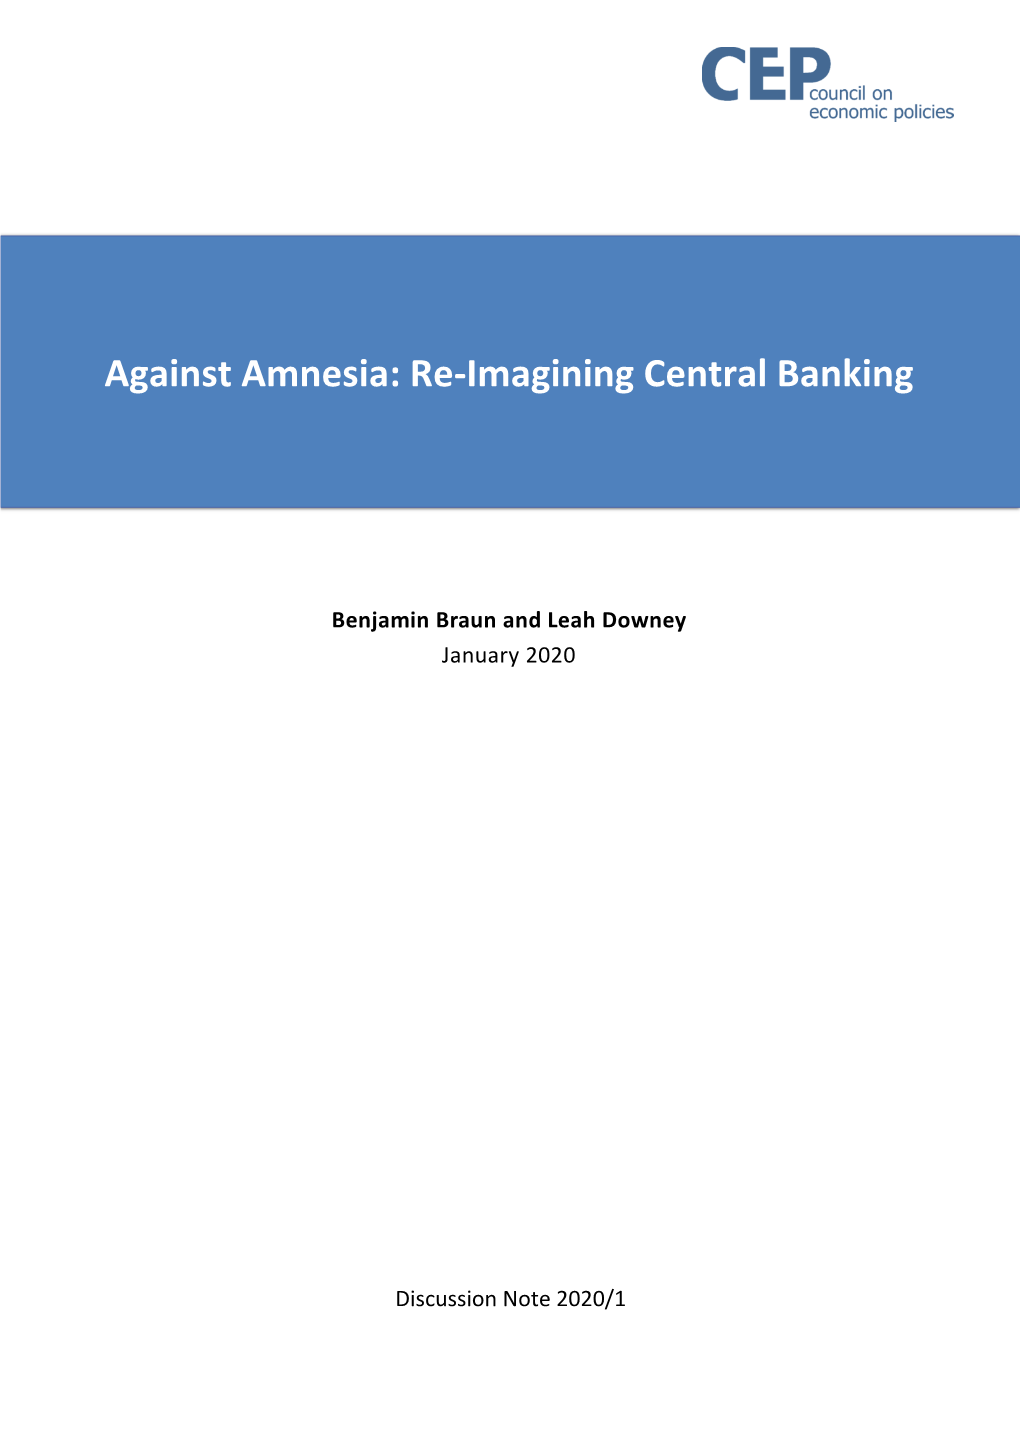 Against Amnesia: Re-Imagining Central Banking